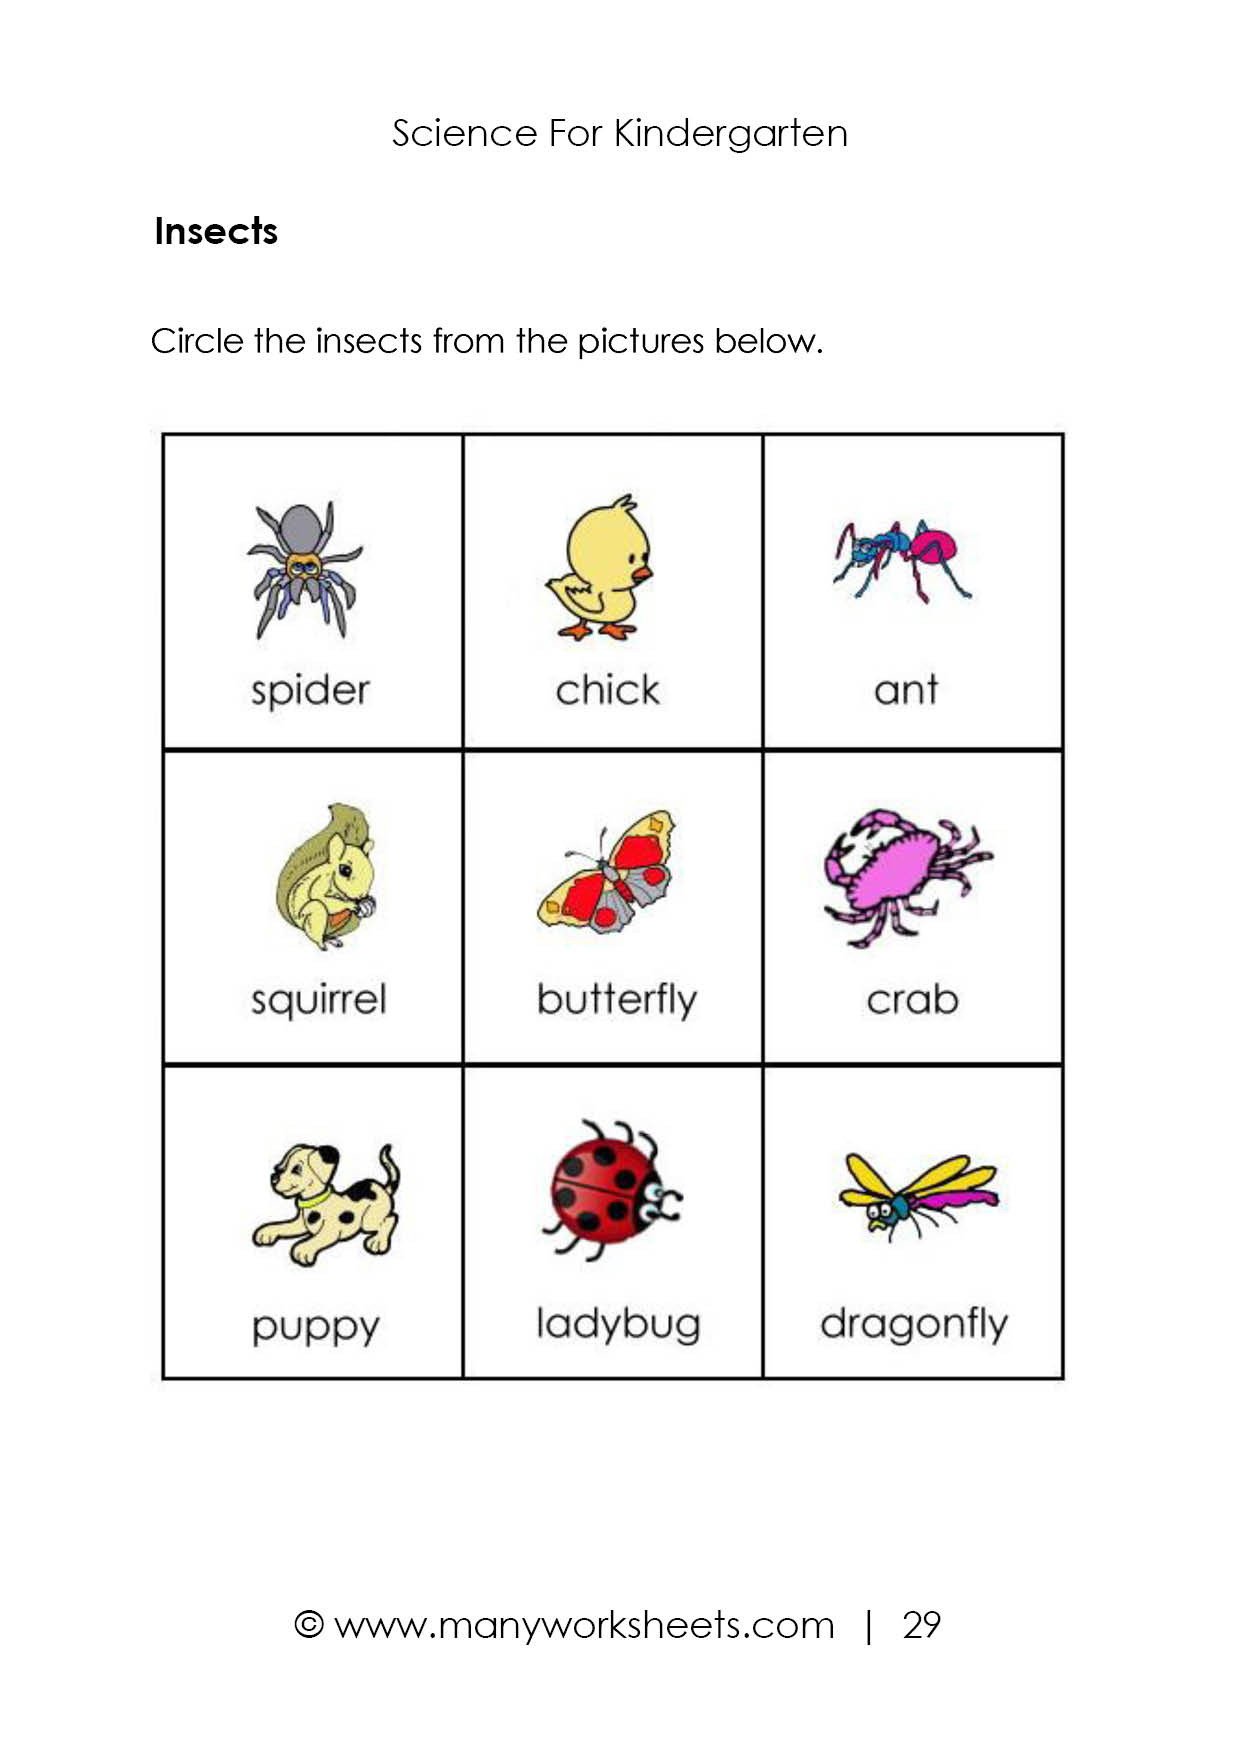 Insects Worksheets for Kindergarten Insects Worksheets for Kindergarten